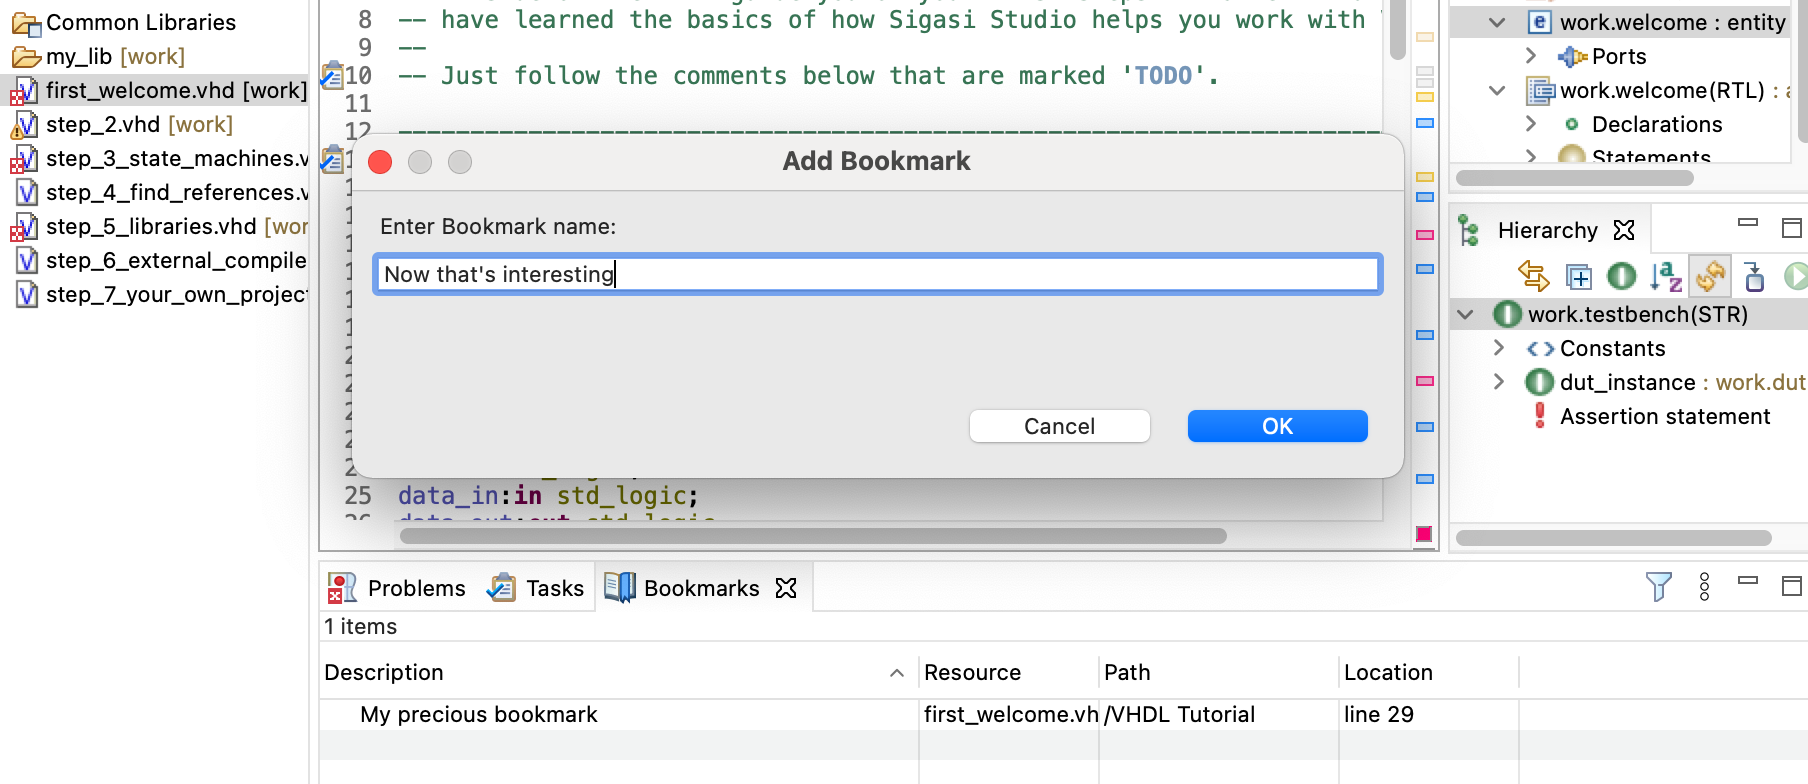 Bookmarks allow to remember relevant locations in the code base